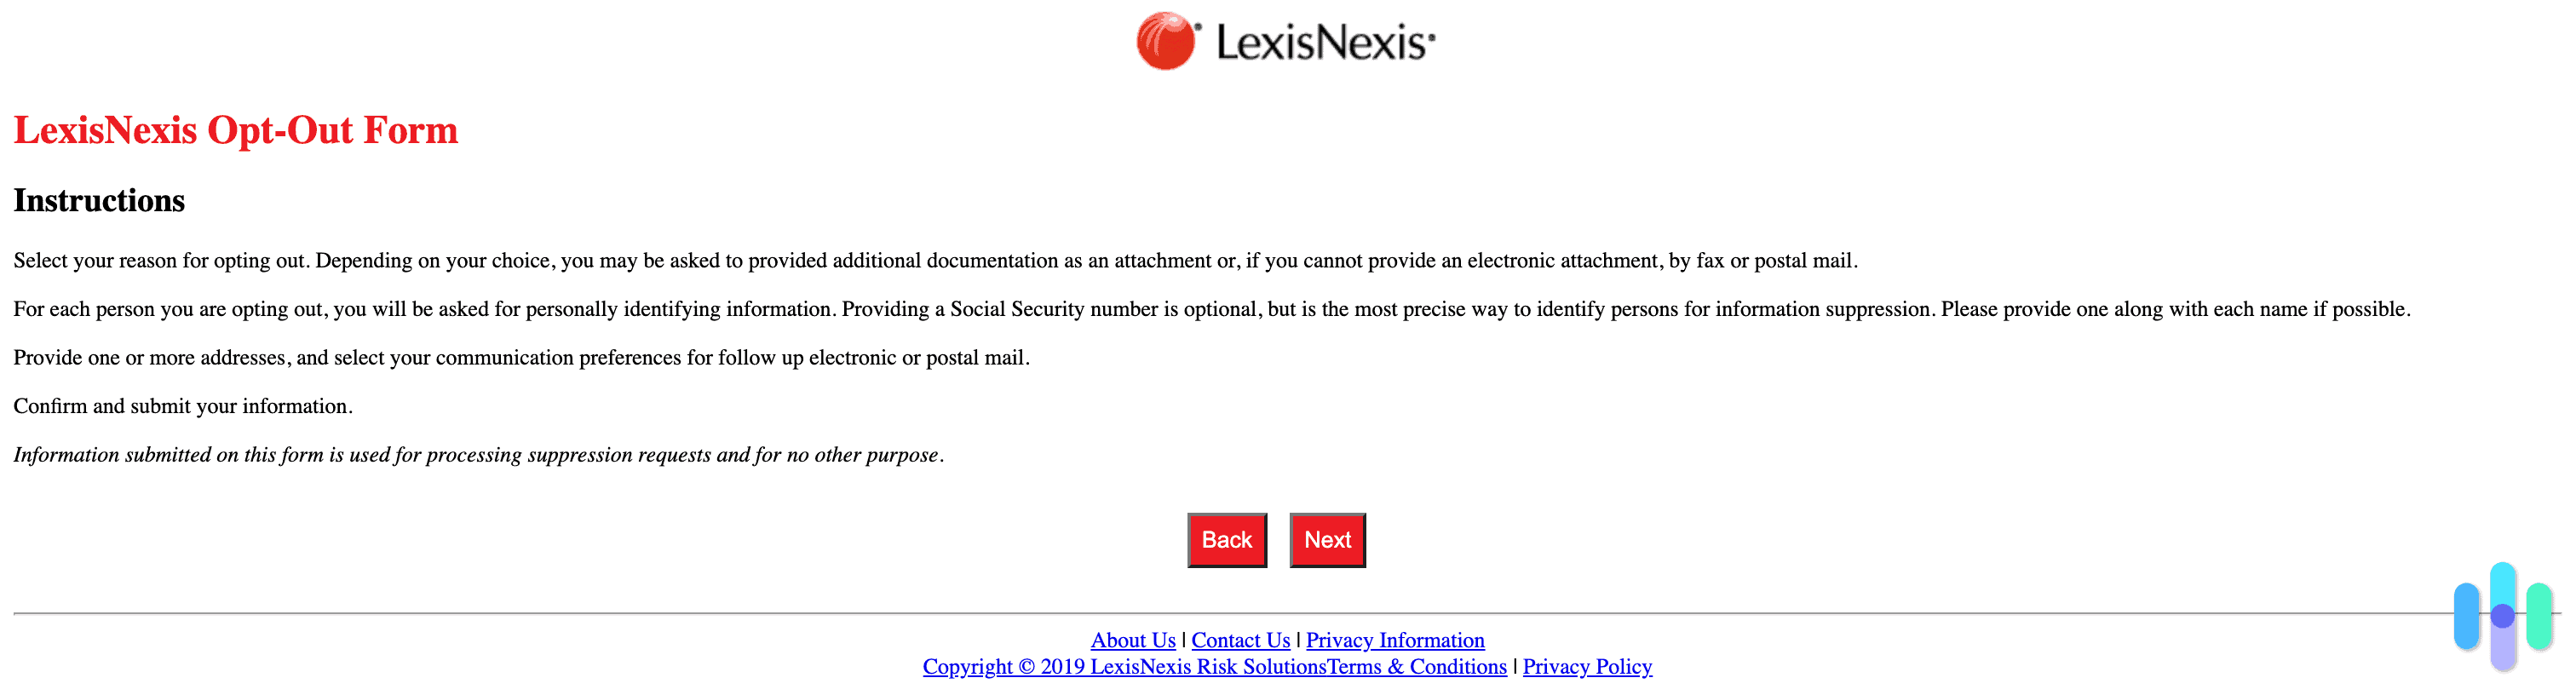 The LexisNexis opt out form instructions